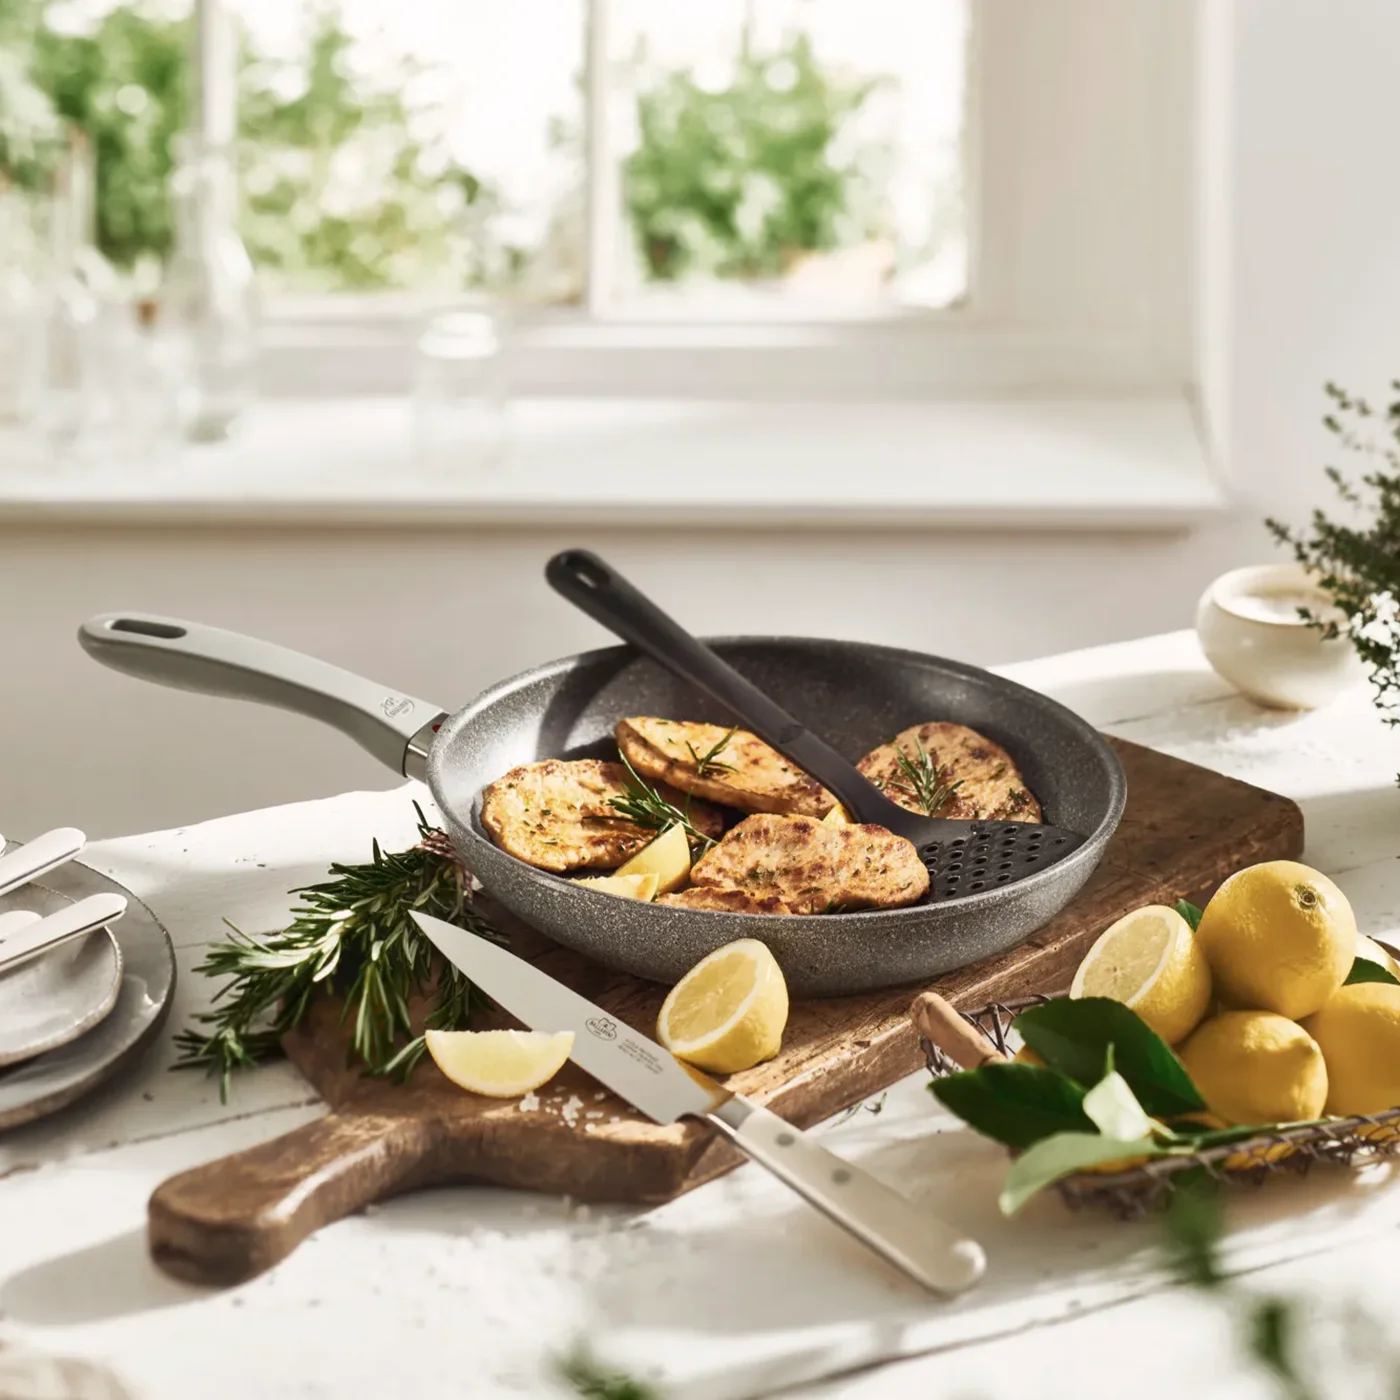 https://www.homethreads.com/files/zwilling/75003-103-0-ballarini-parma-plus-by-henckels-2-pc-aluminum-nonstick-fry-pan-set-made-in-italy-2.webp